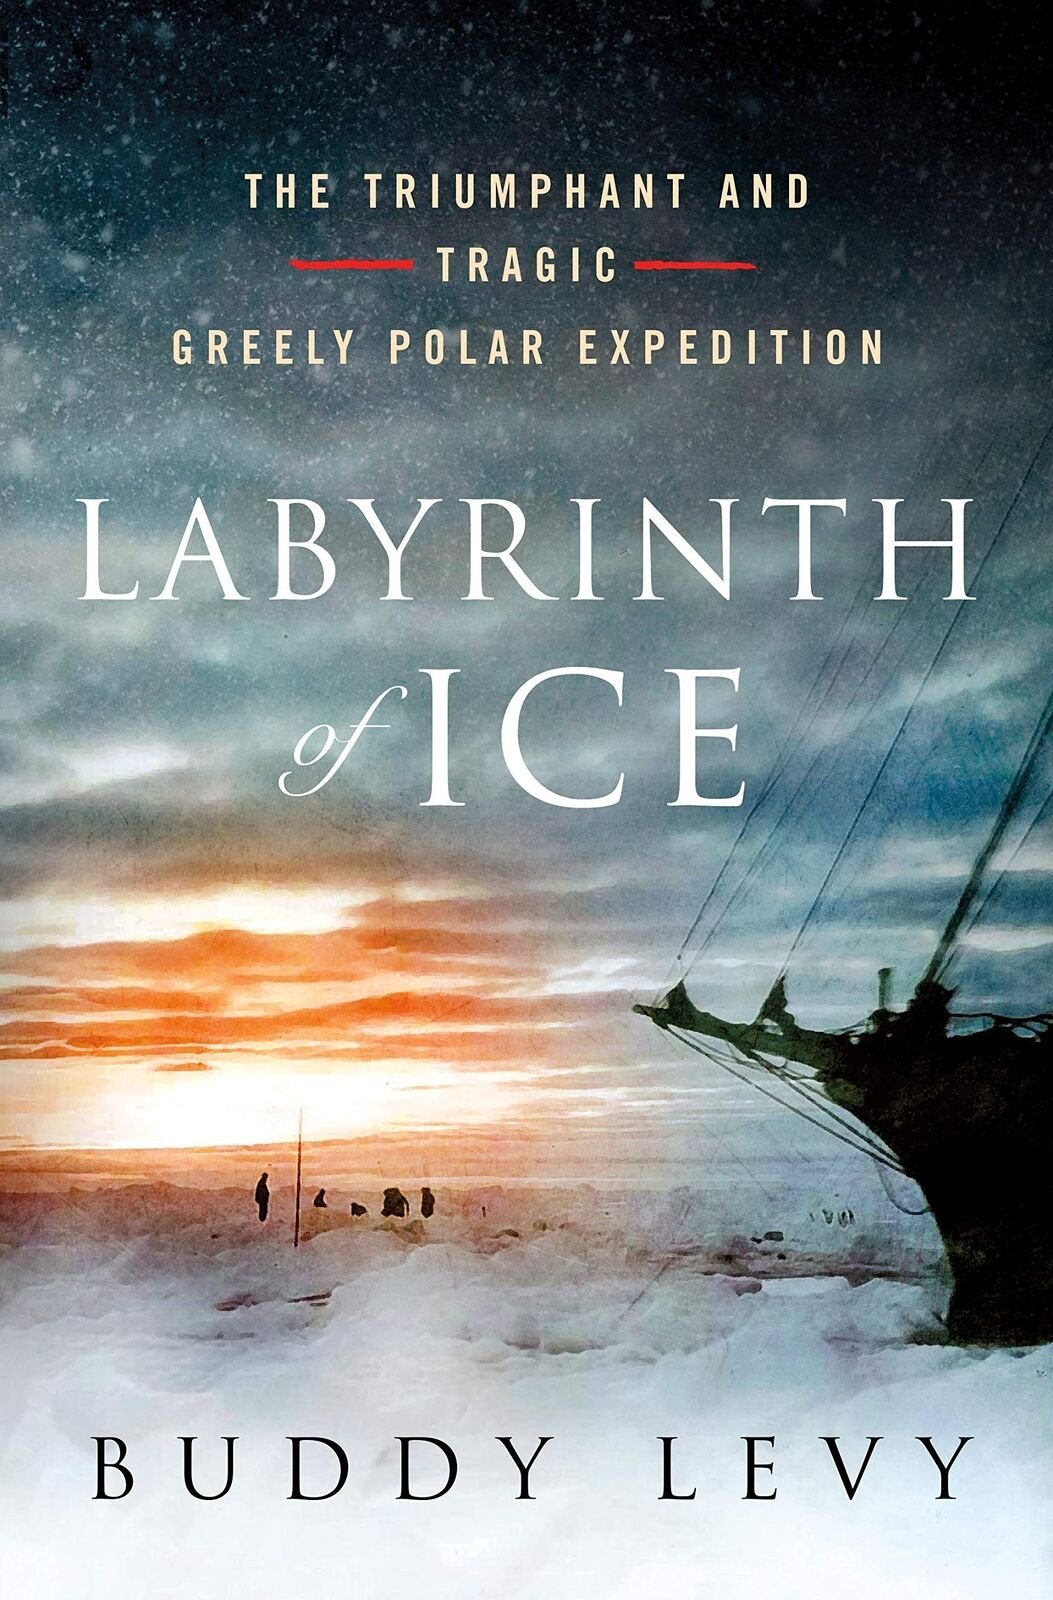 Labyrinth of Ice: The Triumphant and Tragic Greely Polar Expedition Levy, Buddy